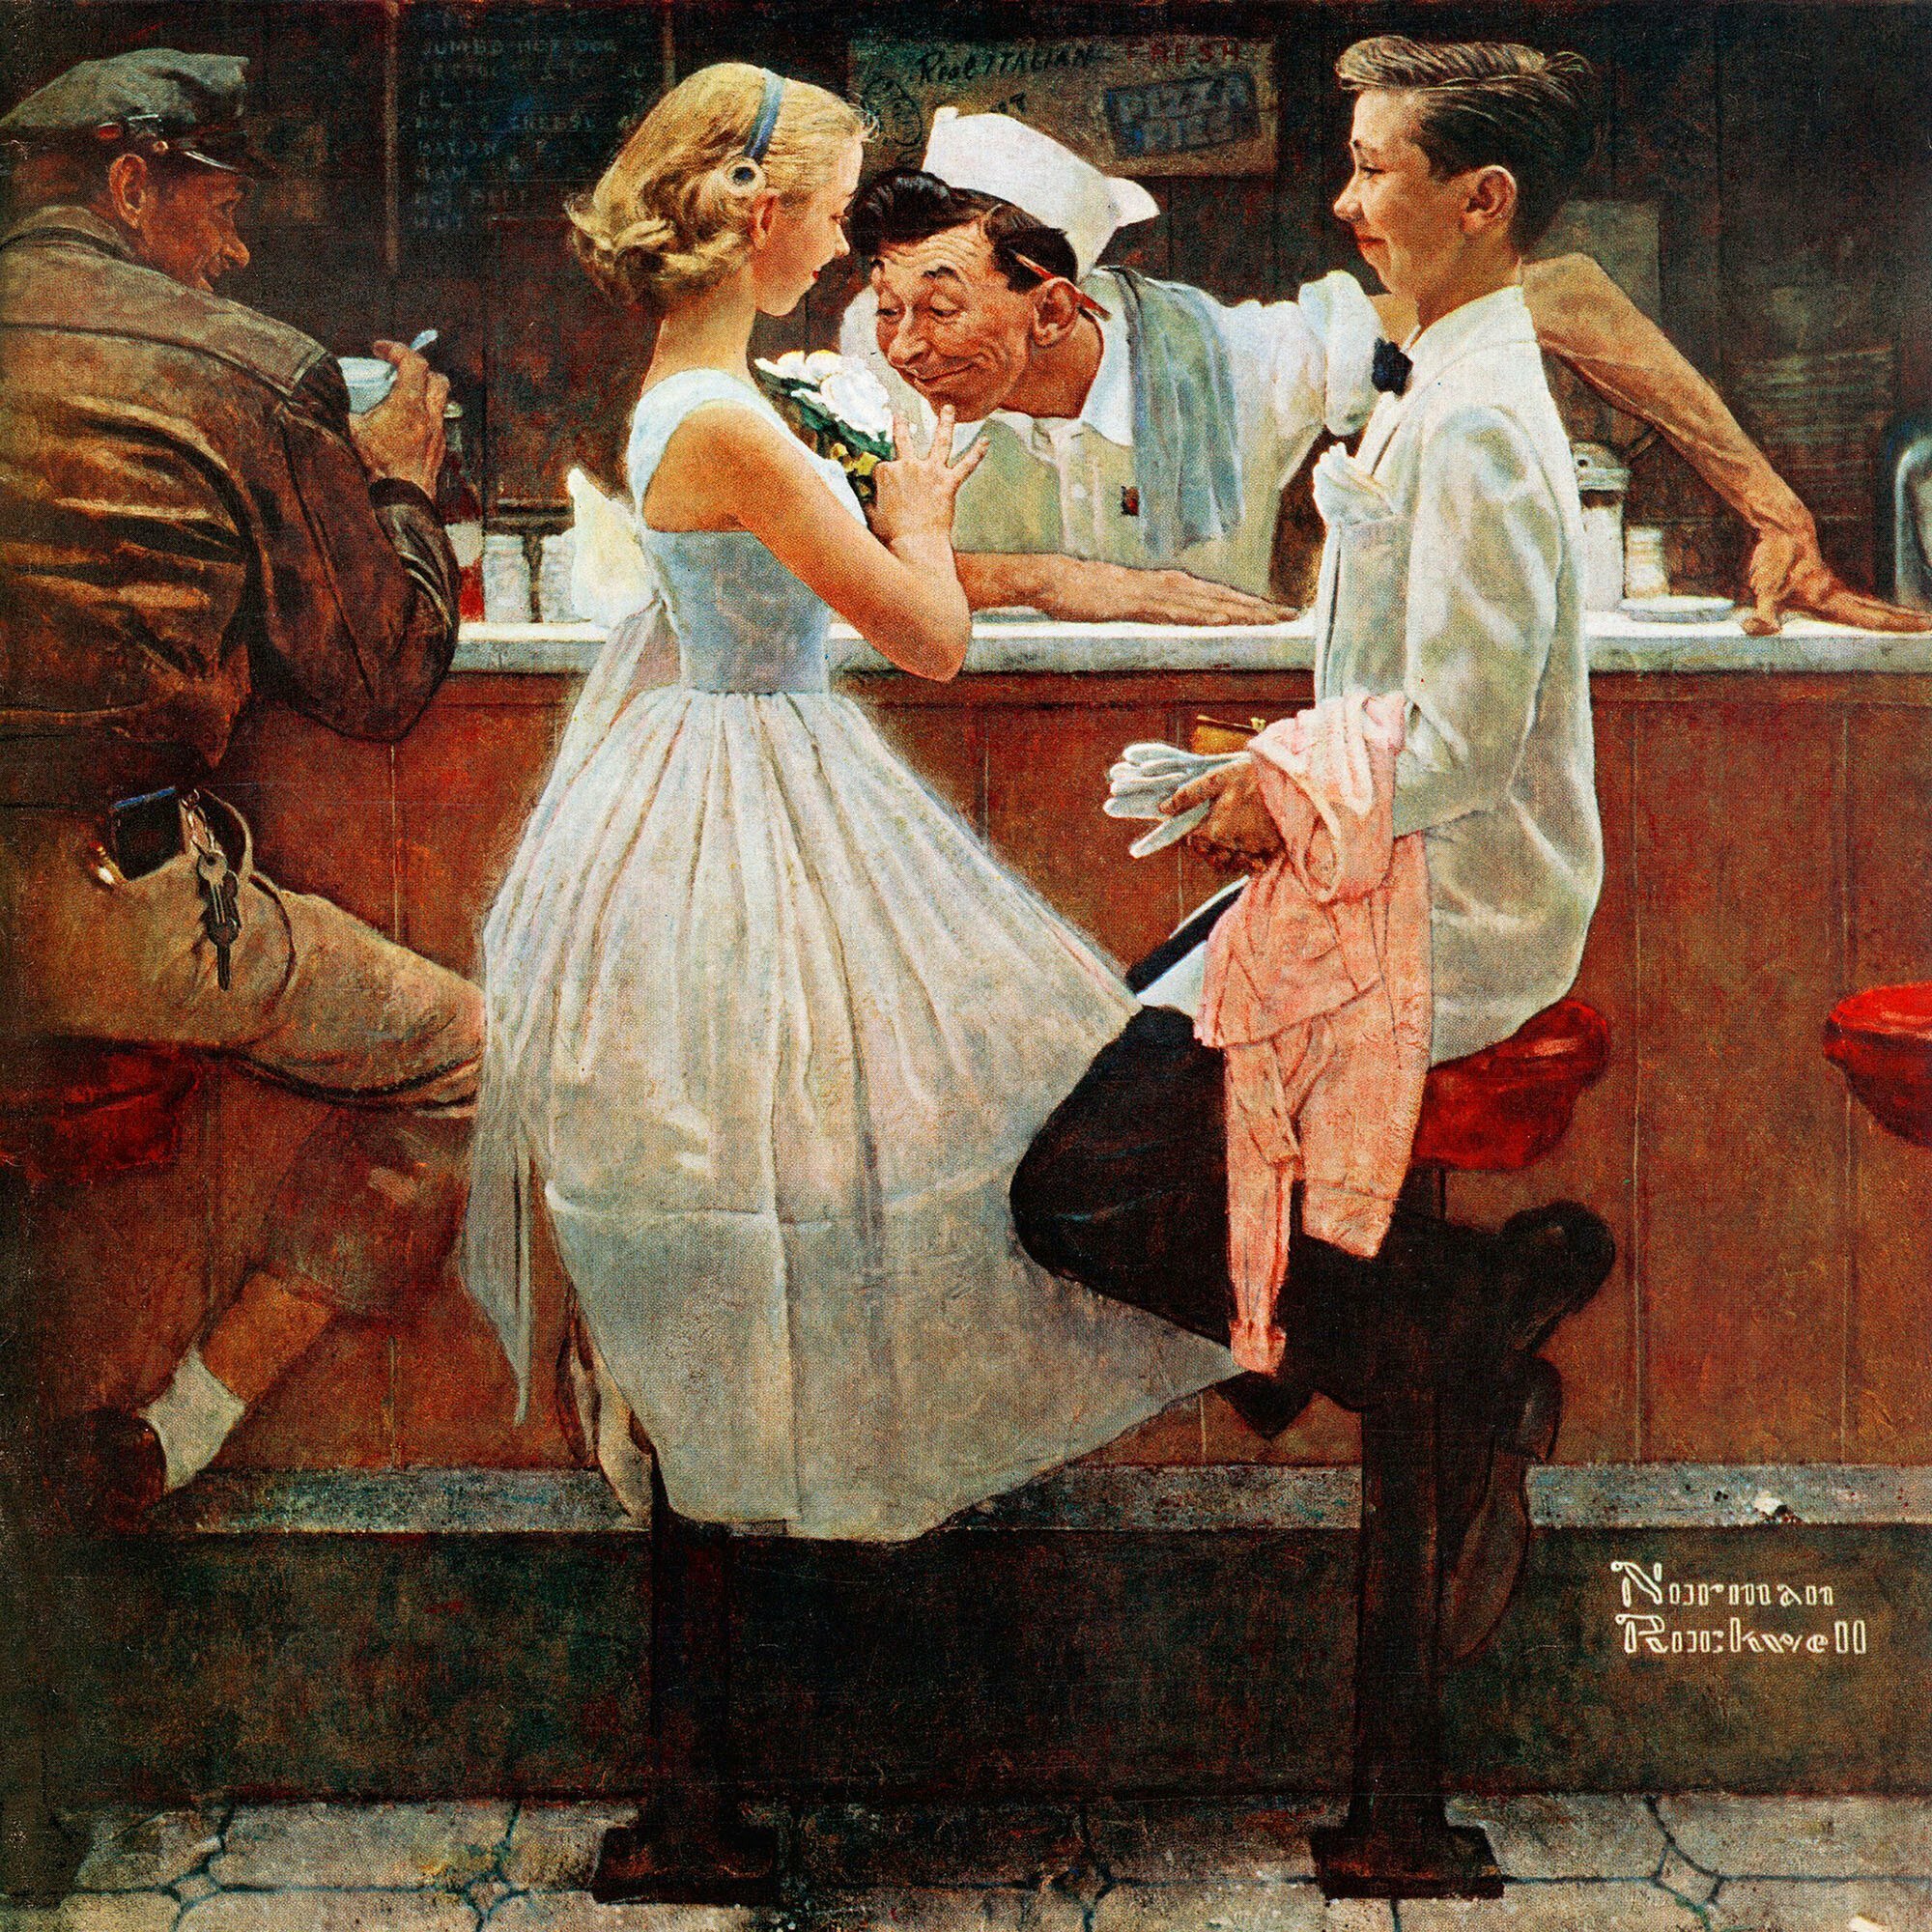 The works of Norman Rockwell, part 1 - Art, Drawing, Norman Rockwell, A selection, Longpost